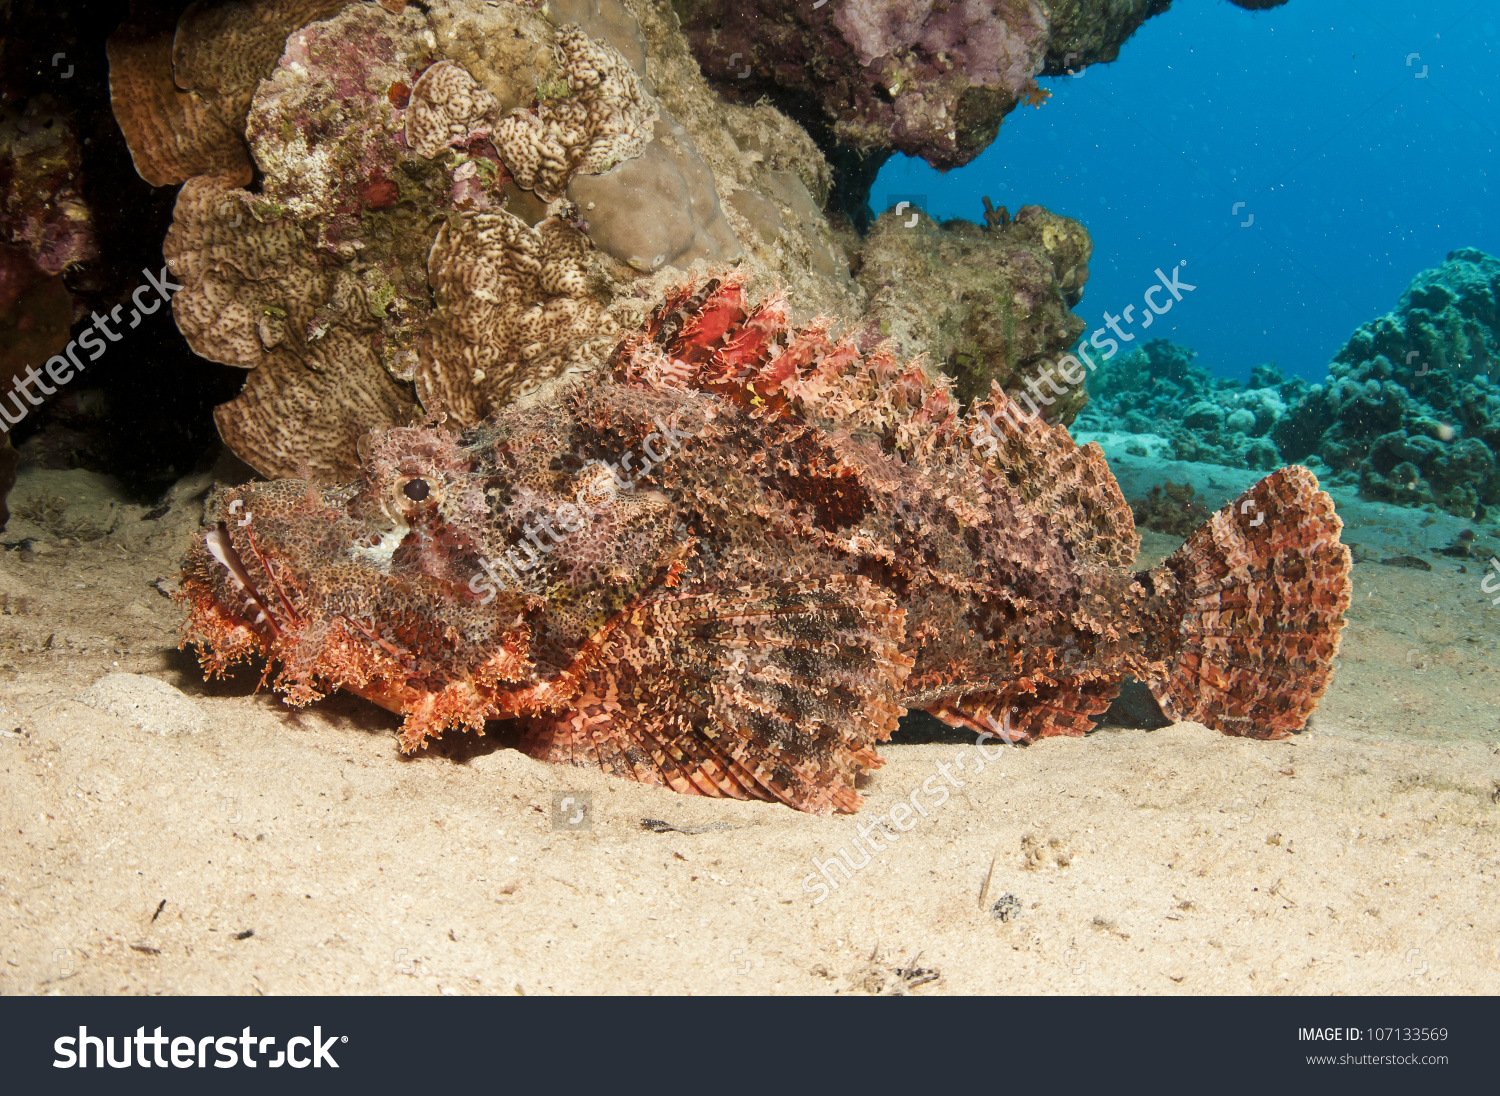 Scorpion Fish On A Coral Reef In The Red Sea In Clear Blue Water.